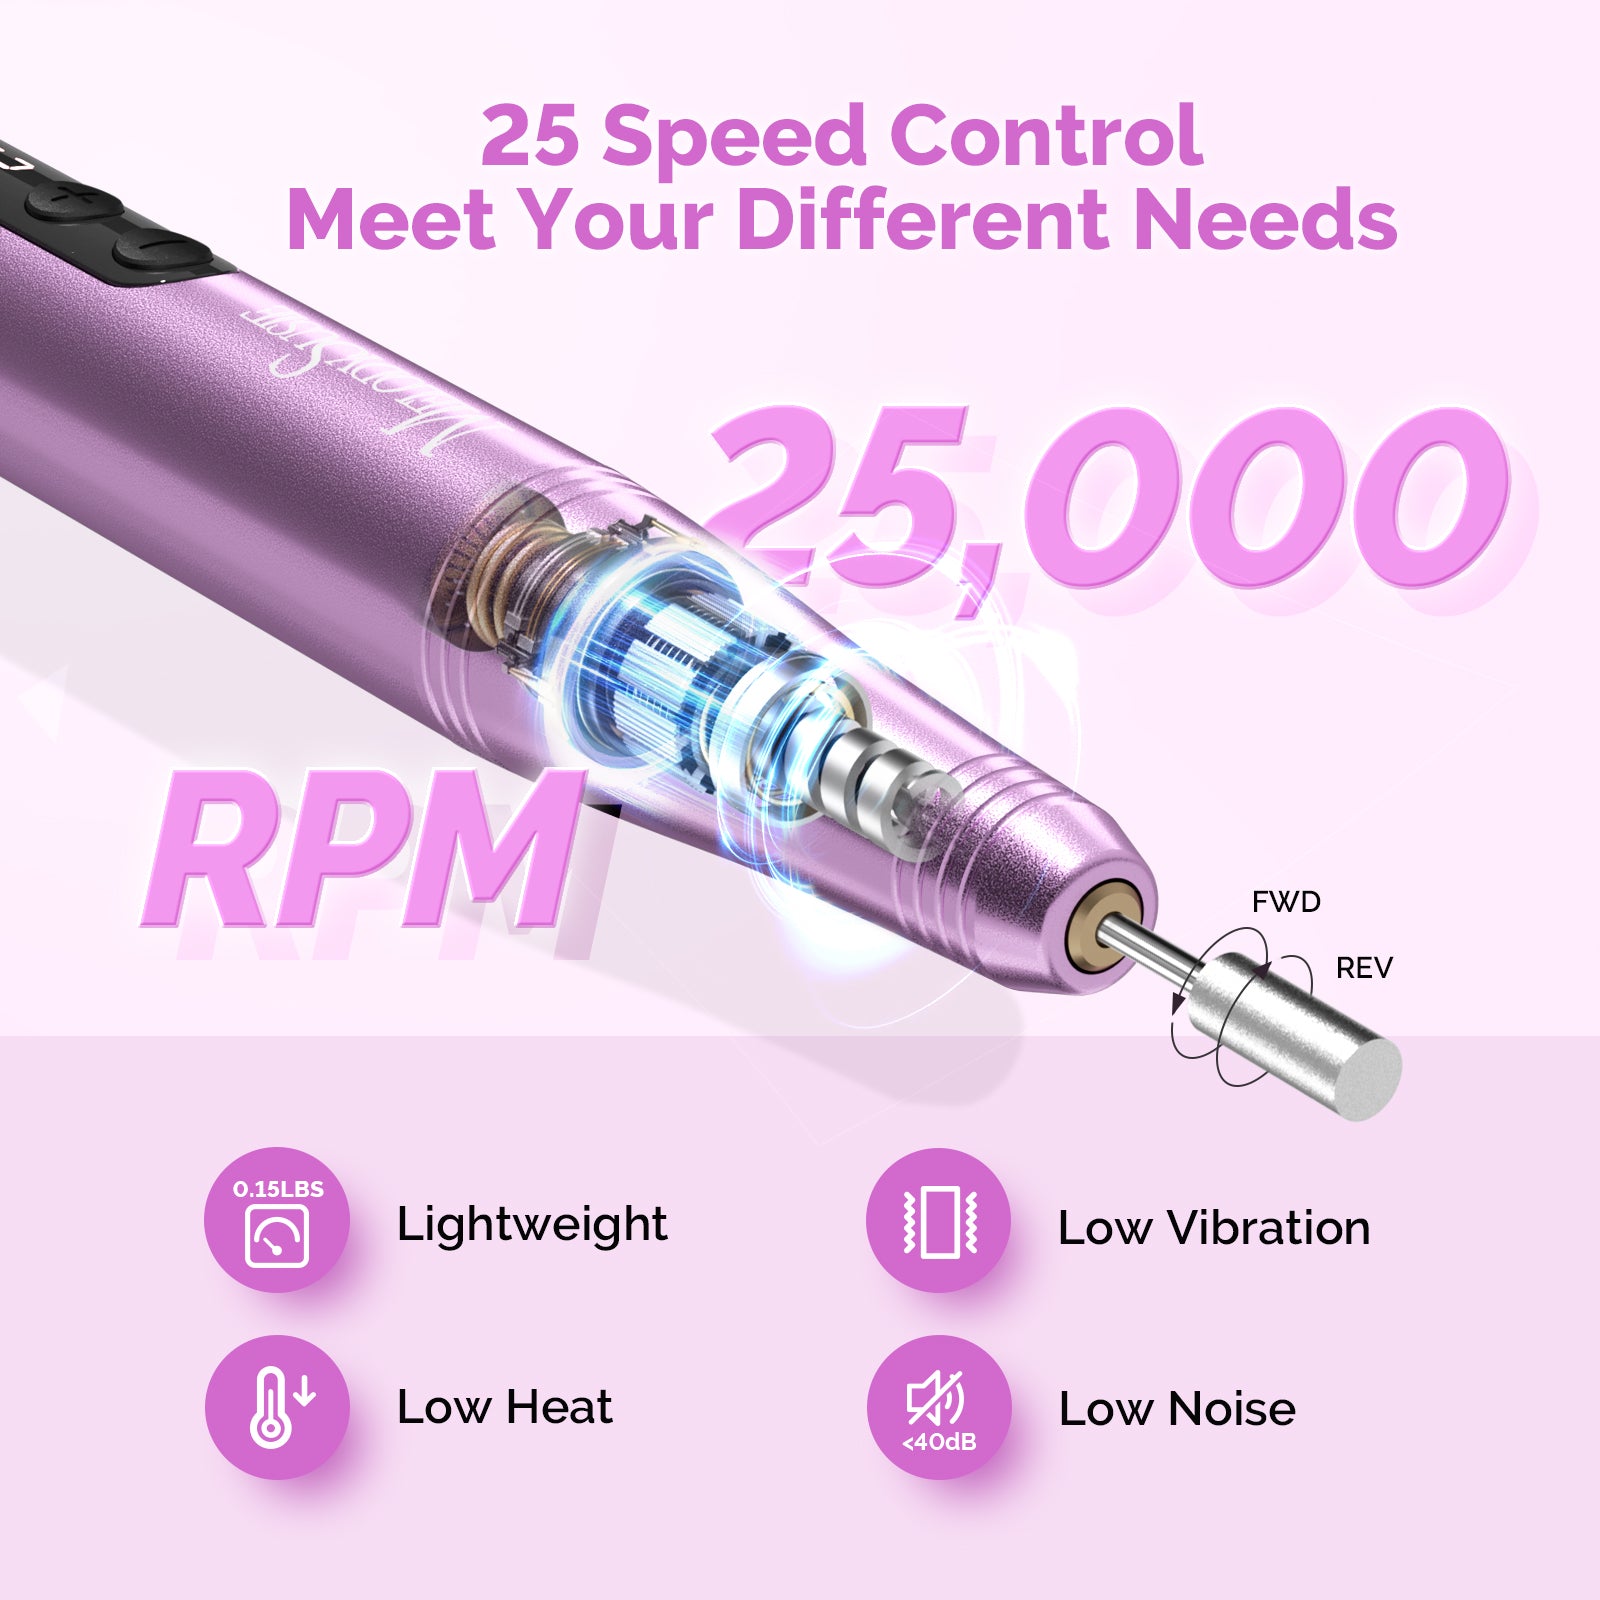 PC180F Portable Rechargeable Nail Drill 25000RPM (Rose Gold)